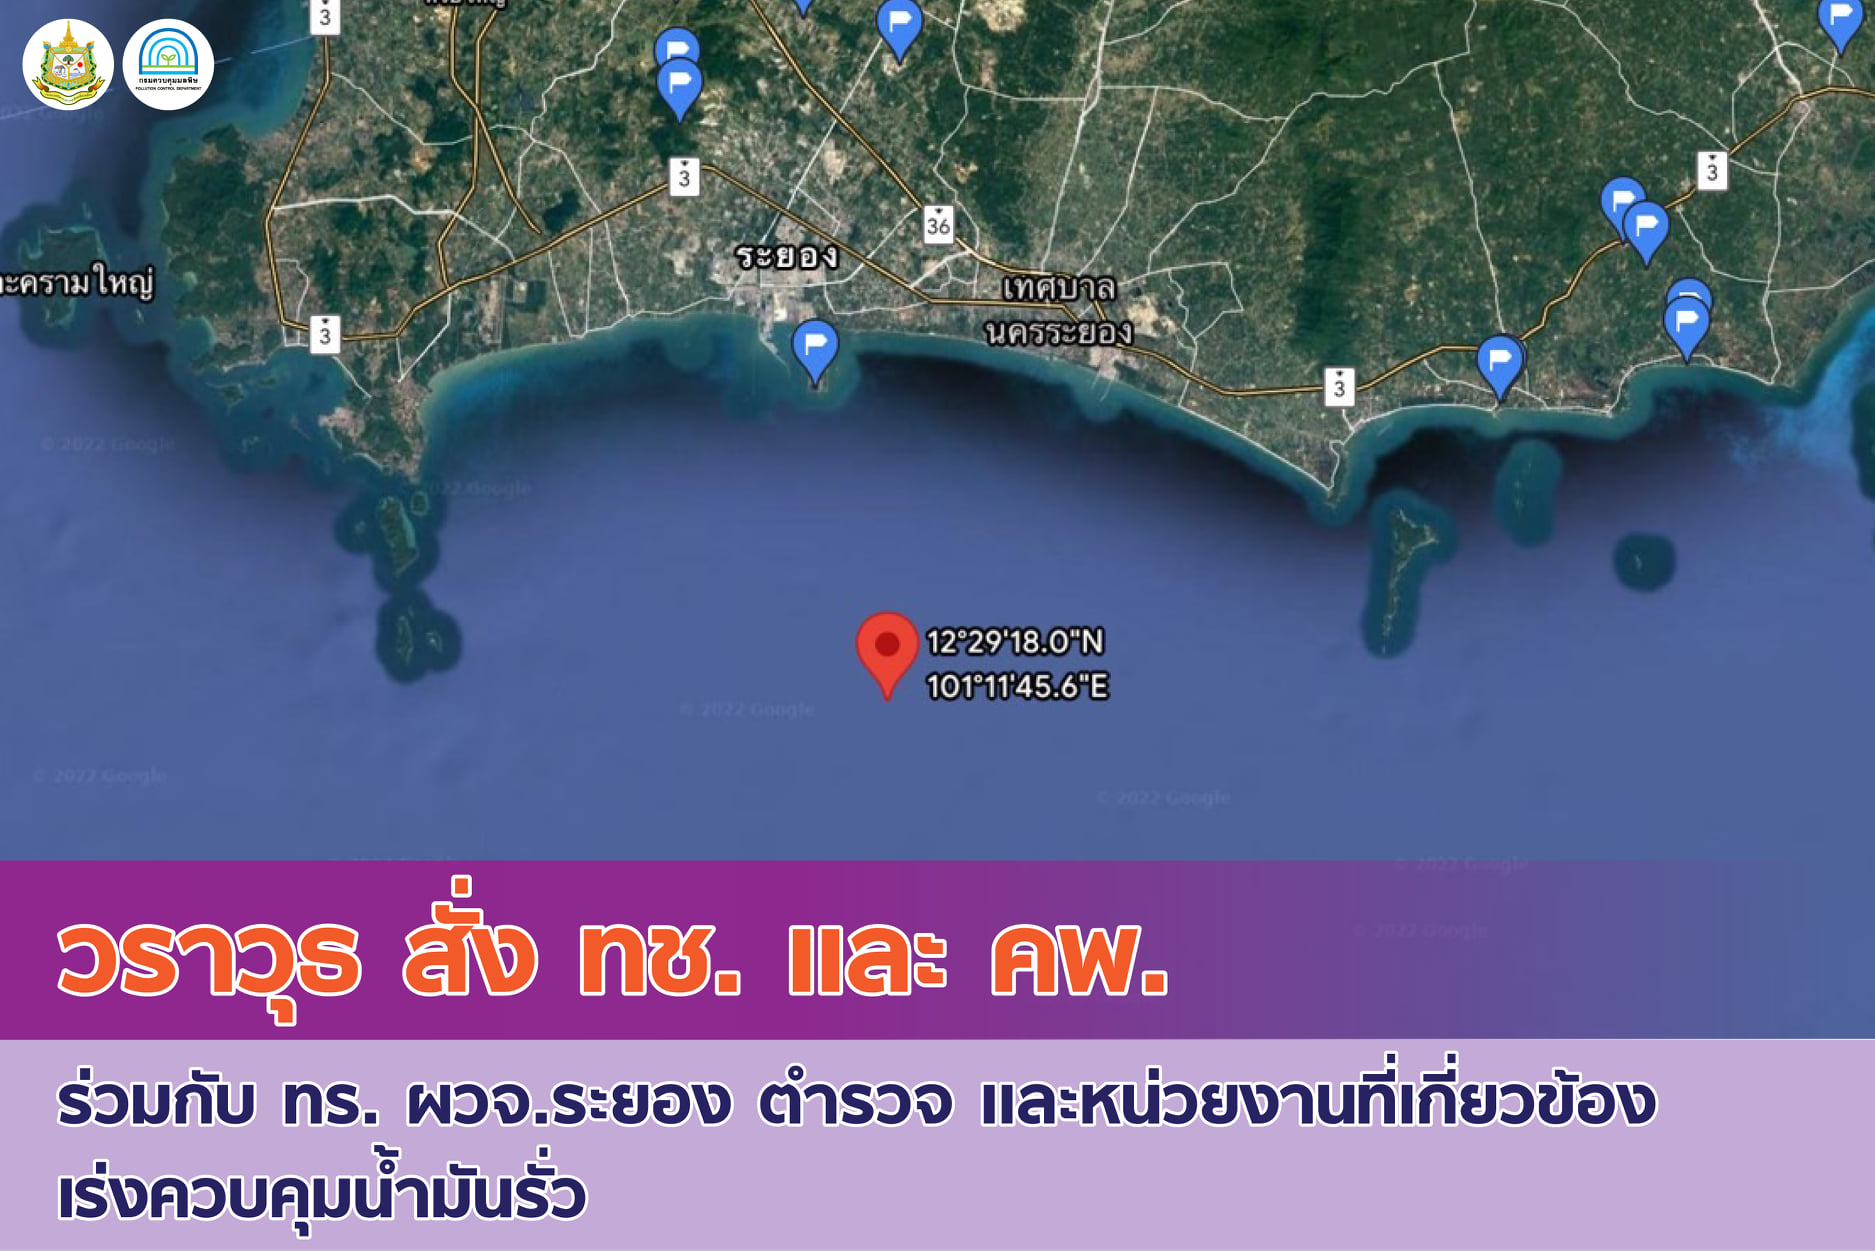 rayong-oil-spill-pcd-260122